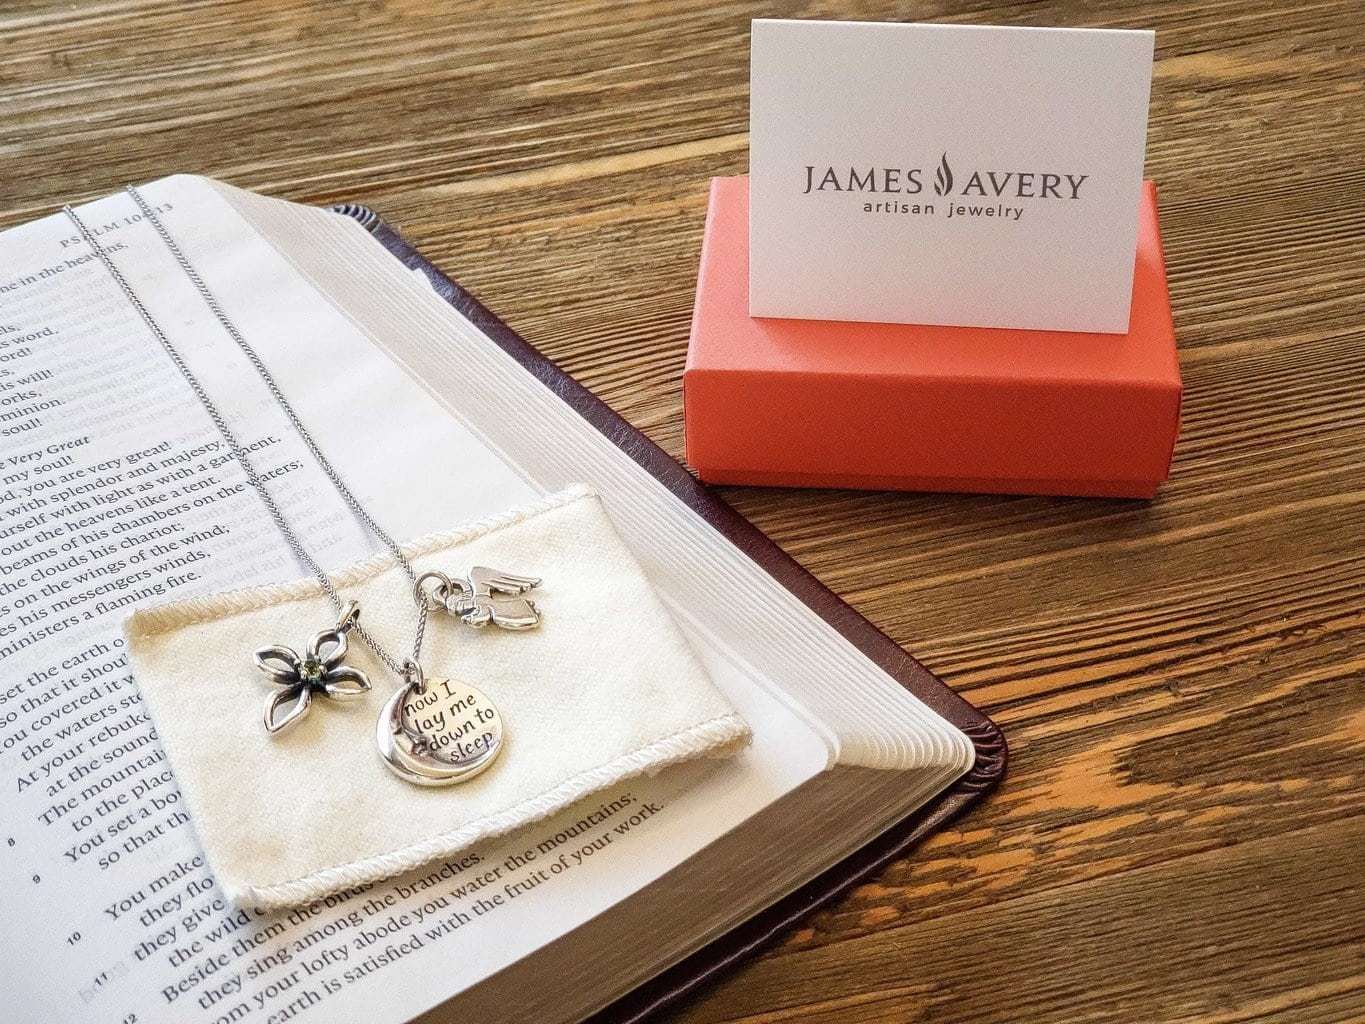 honoring the memories of loved ones, james avery jewelry